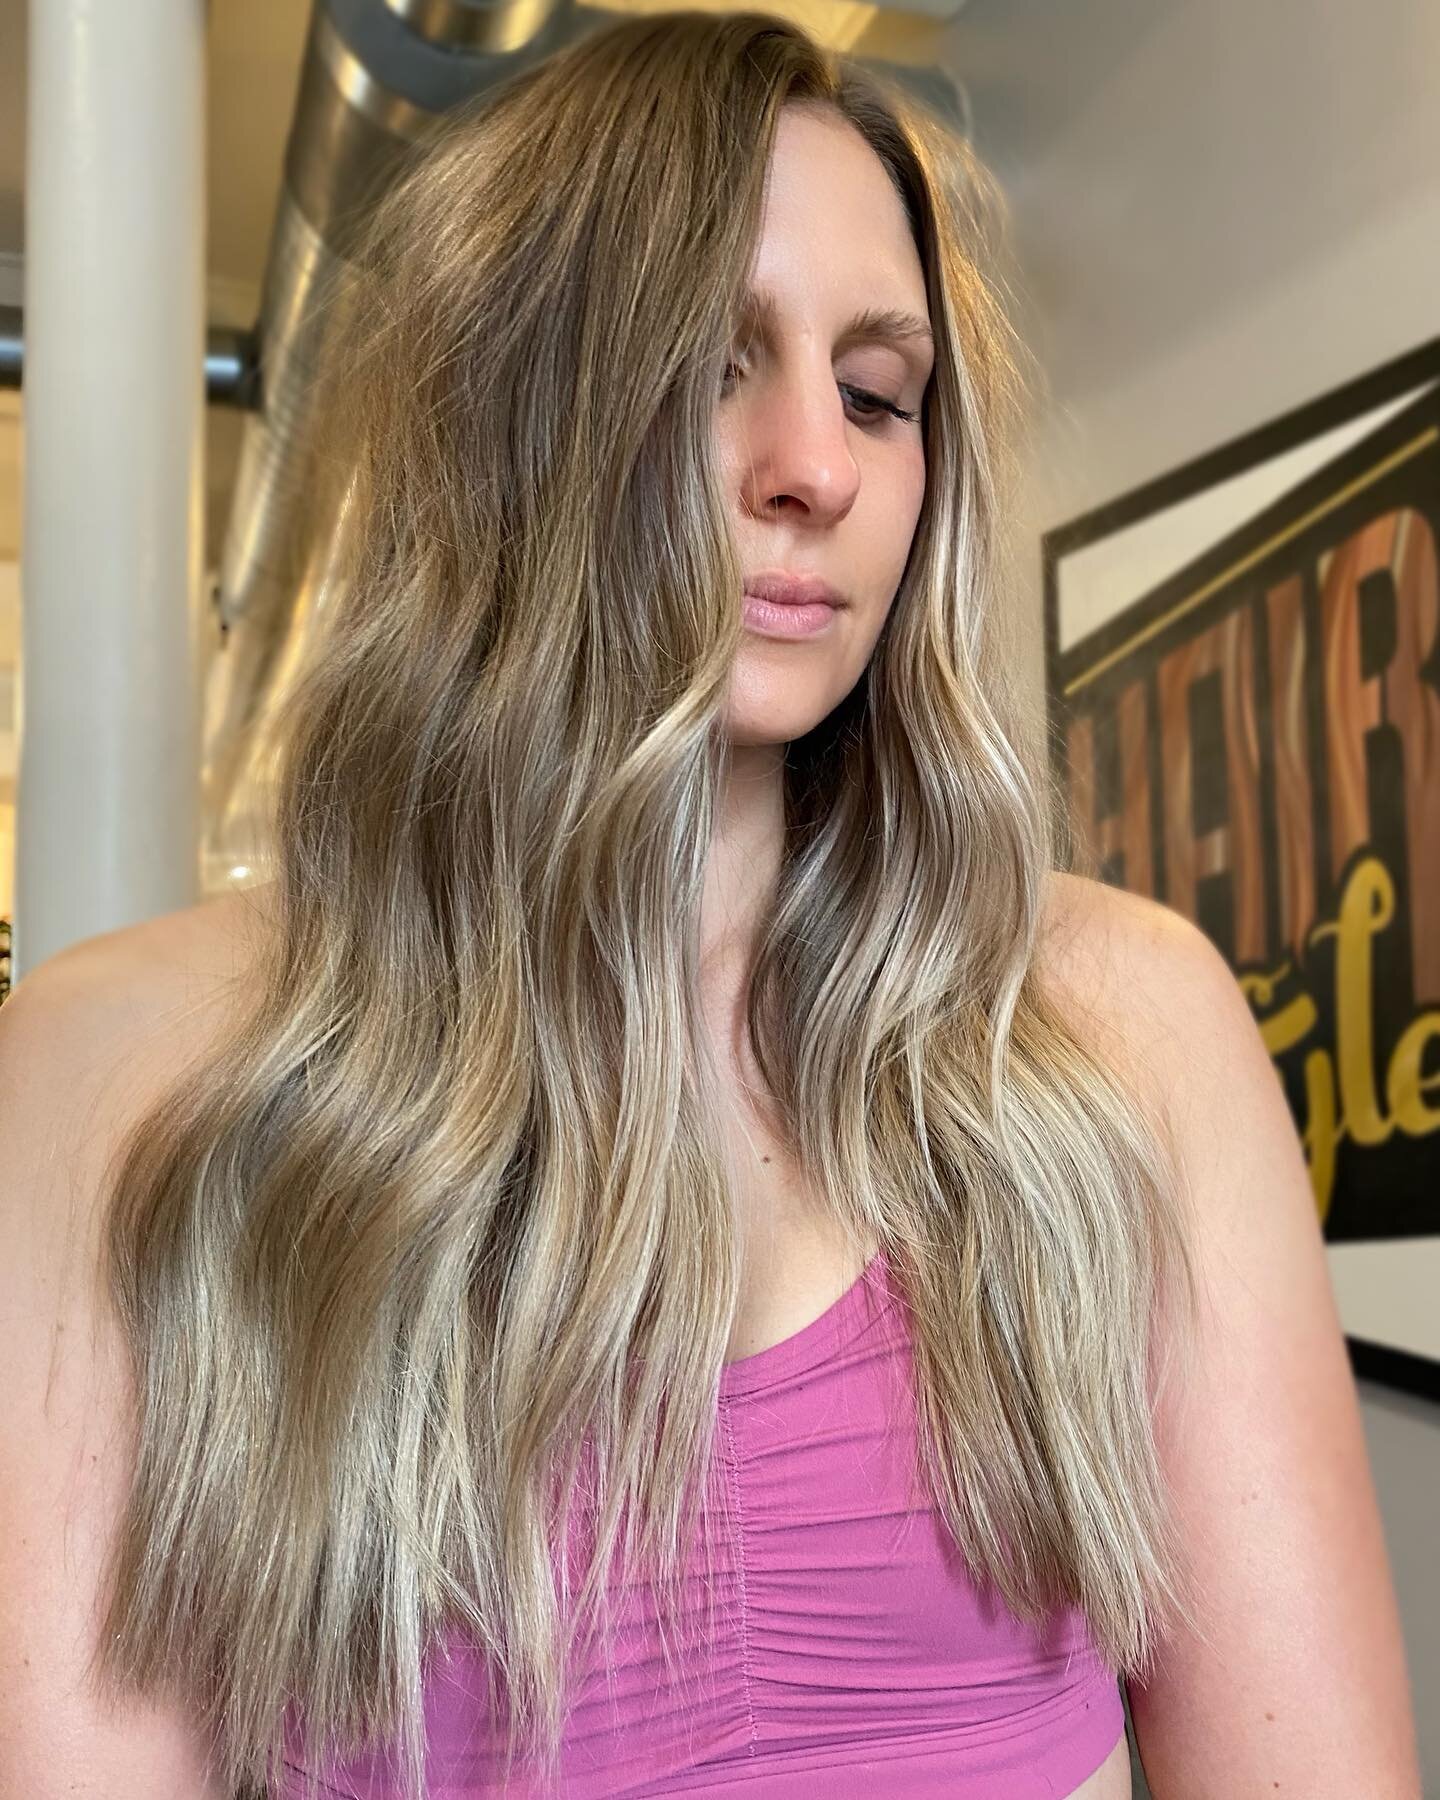 did the fullllll @val.saltstrands on this one ✨

literally dropped my phone and broke it in the middle of the class, so I don&rsquo;t have much documentation BUT &mdash; this weekend I flew out to sweet, sunny San Clemente for the @salt.strands class